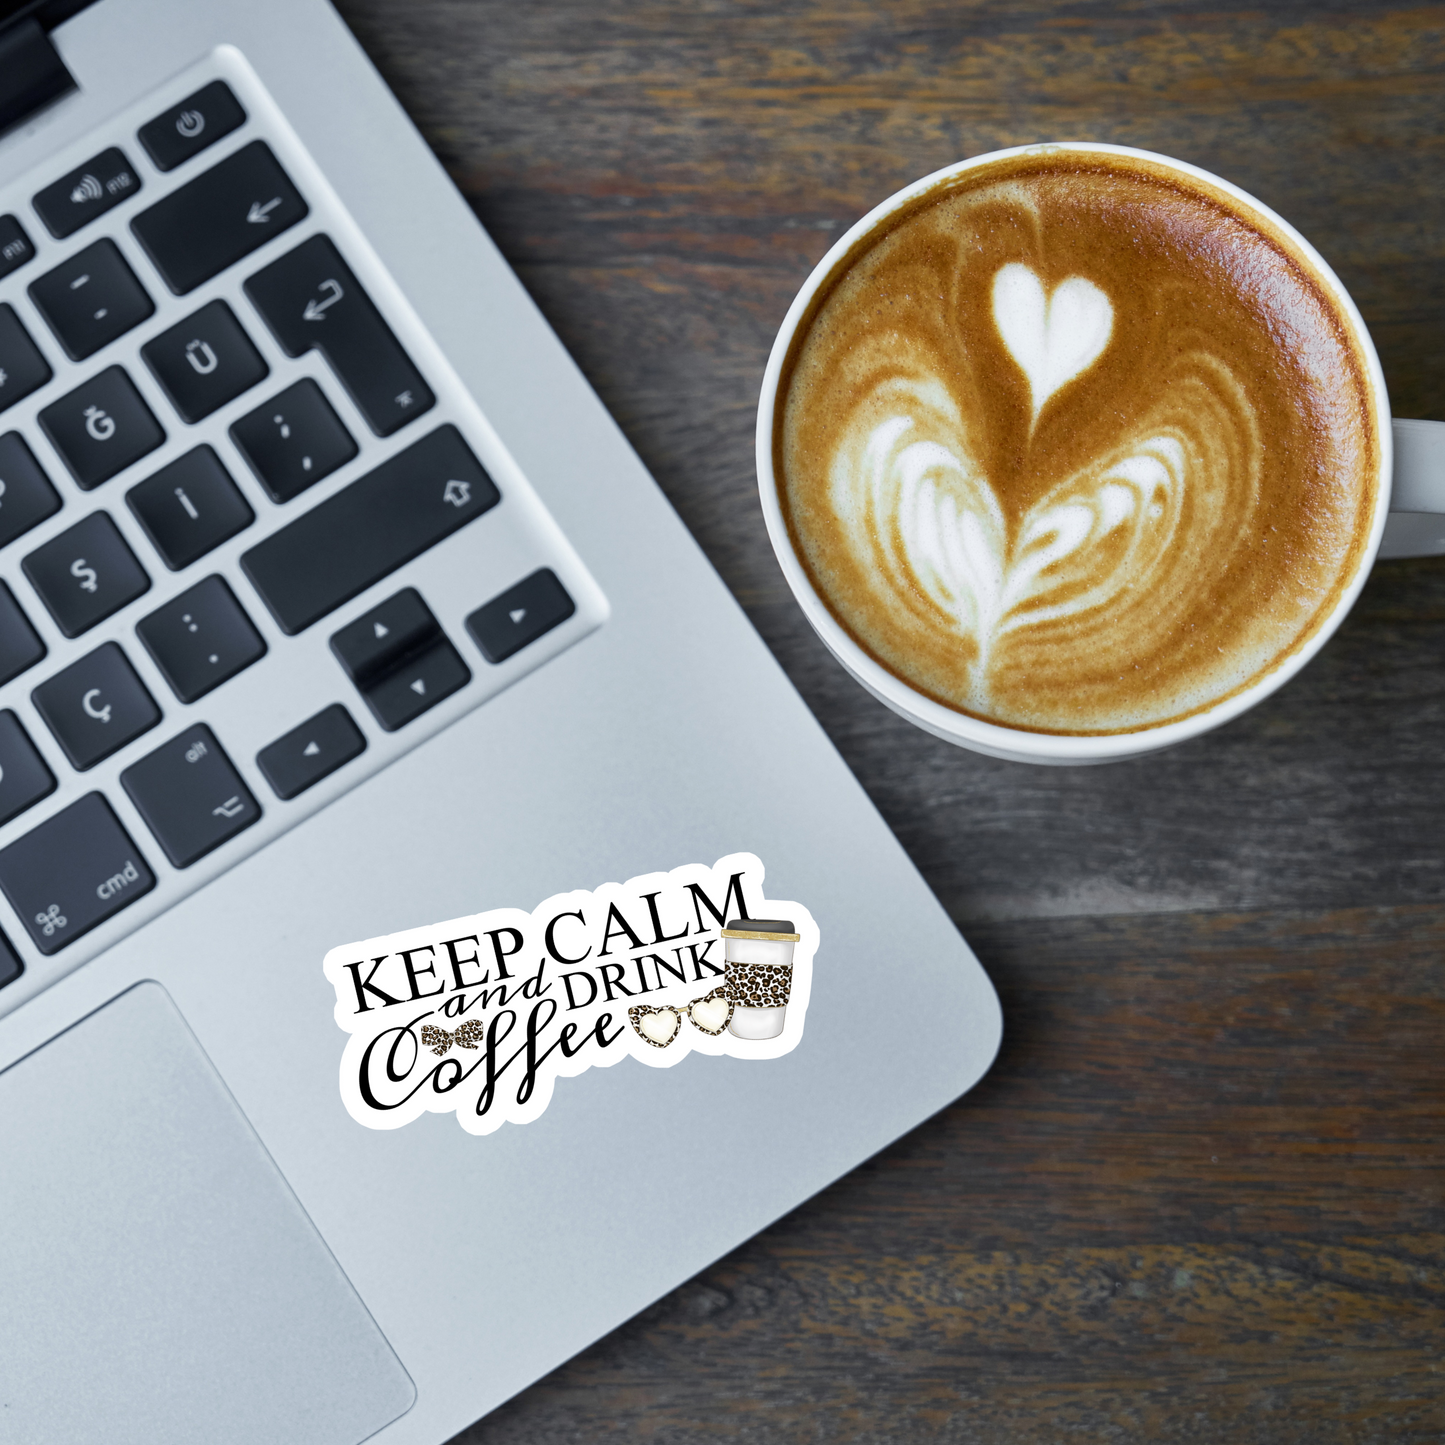 Keep Calm and Drink Coffee sticker on a laptop sitting beside a latte with a steamed milk heart design